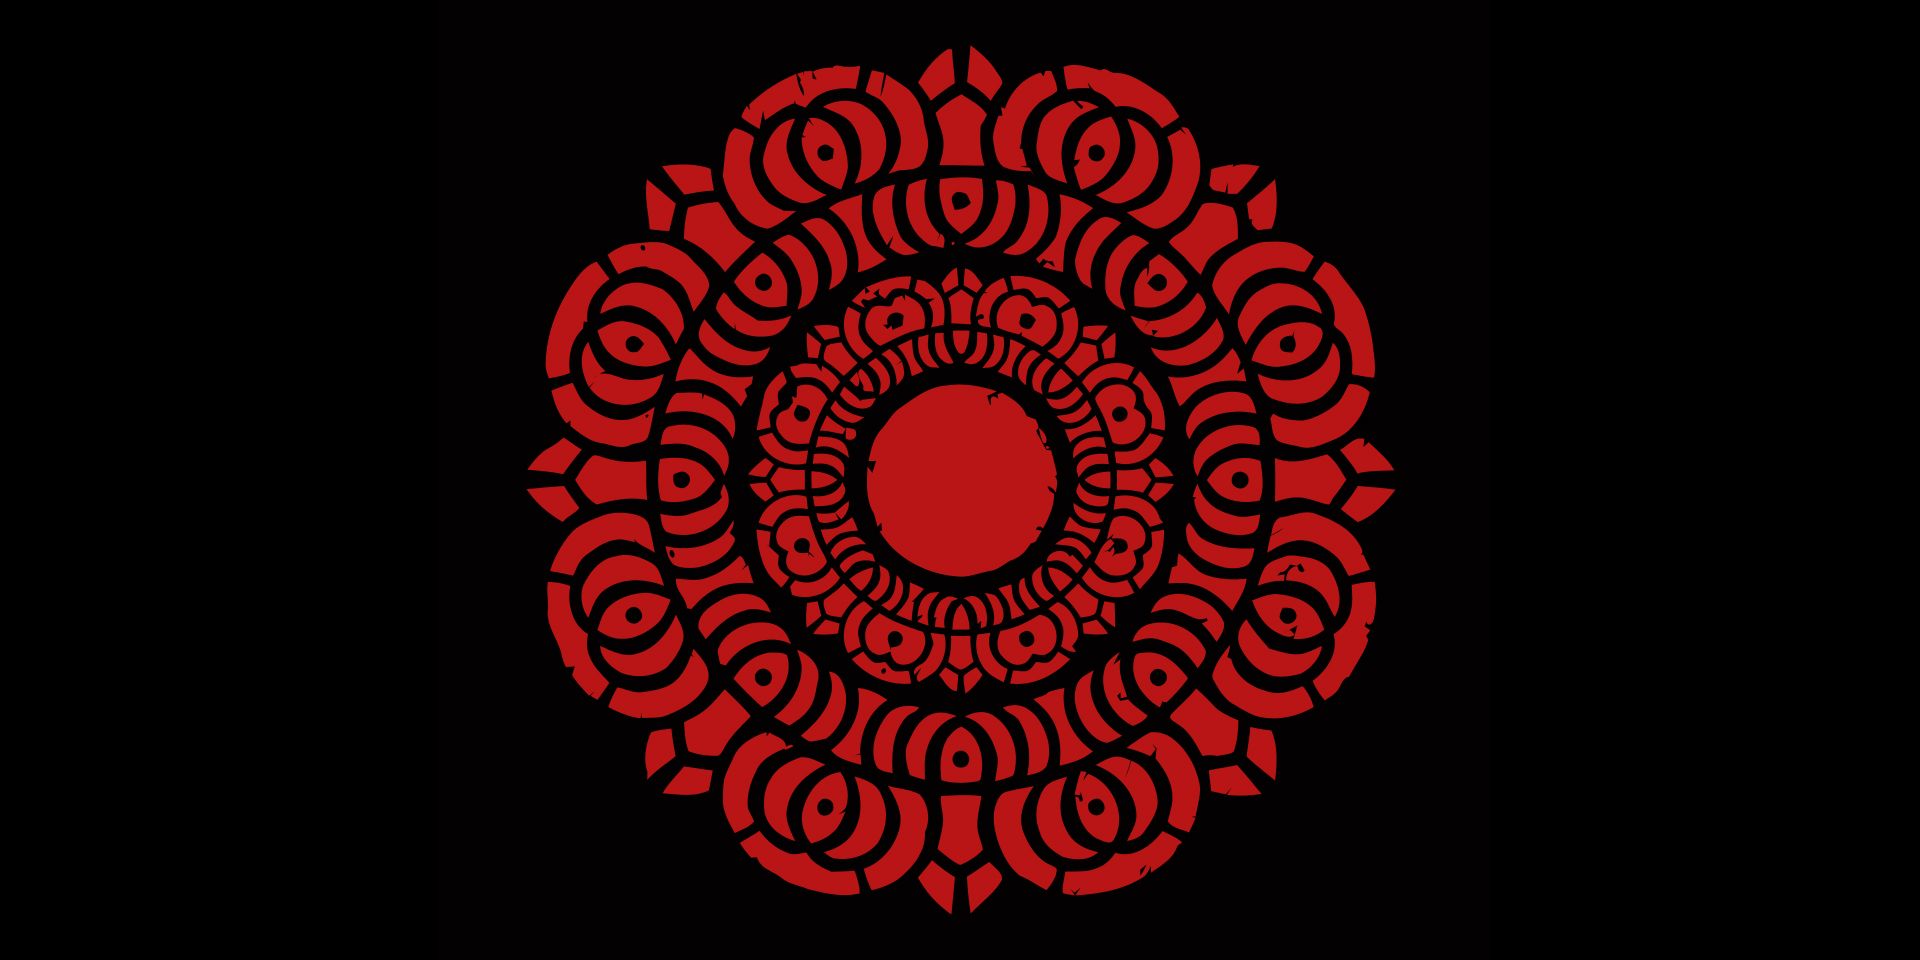 Red Lotus symbol from Avatar